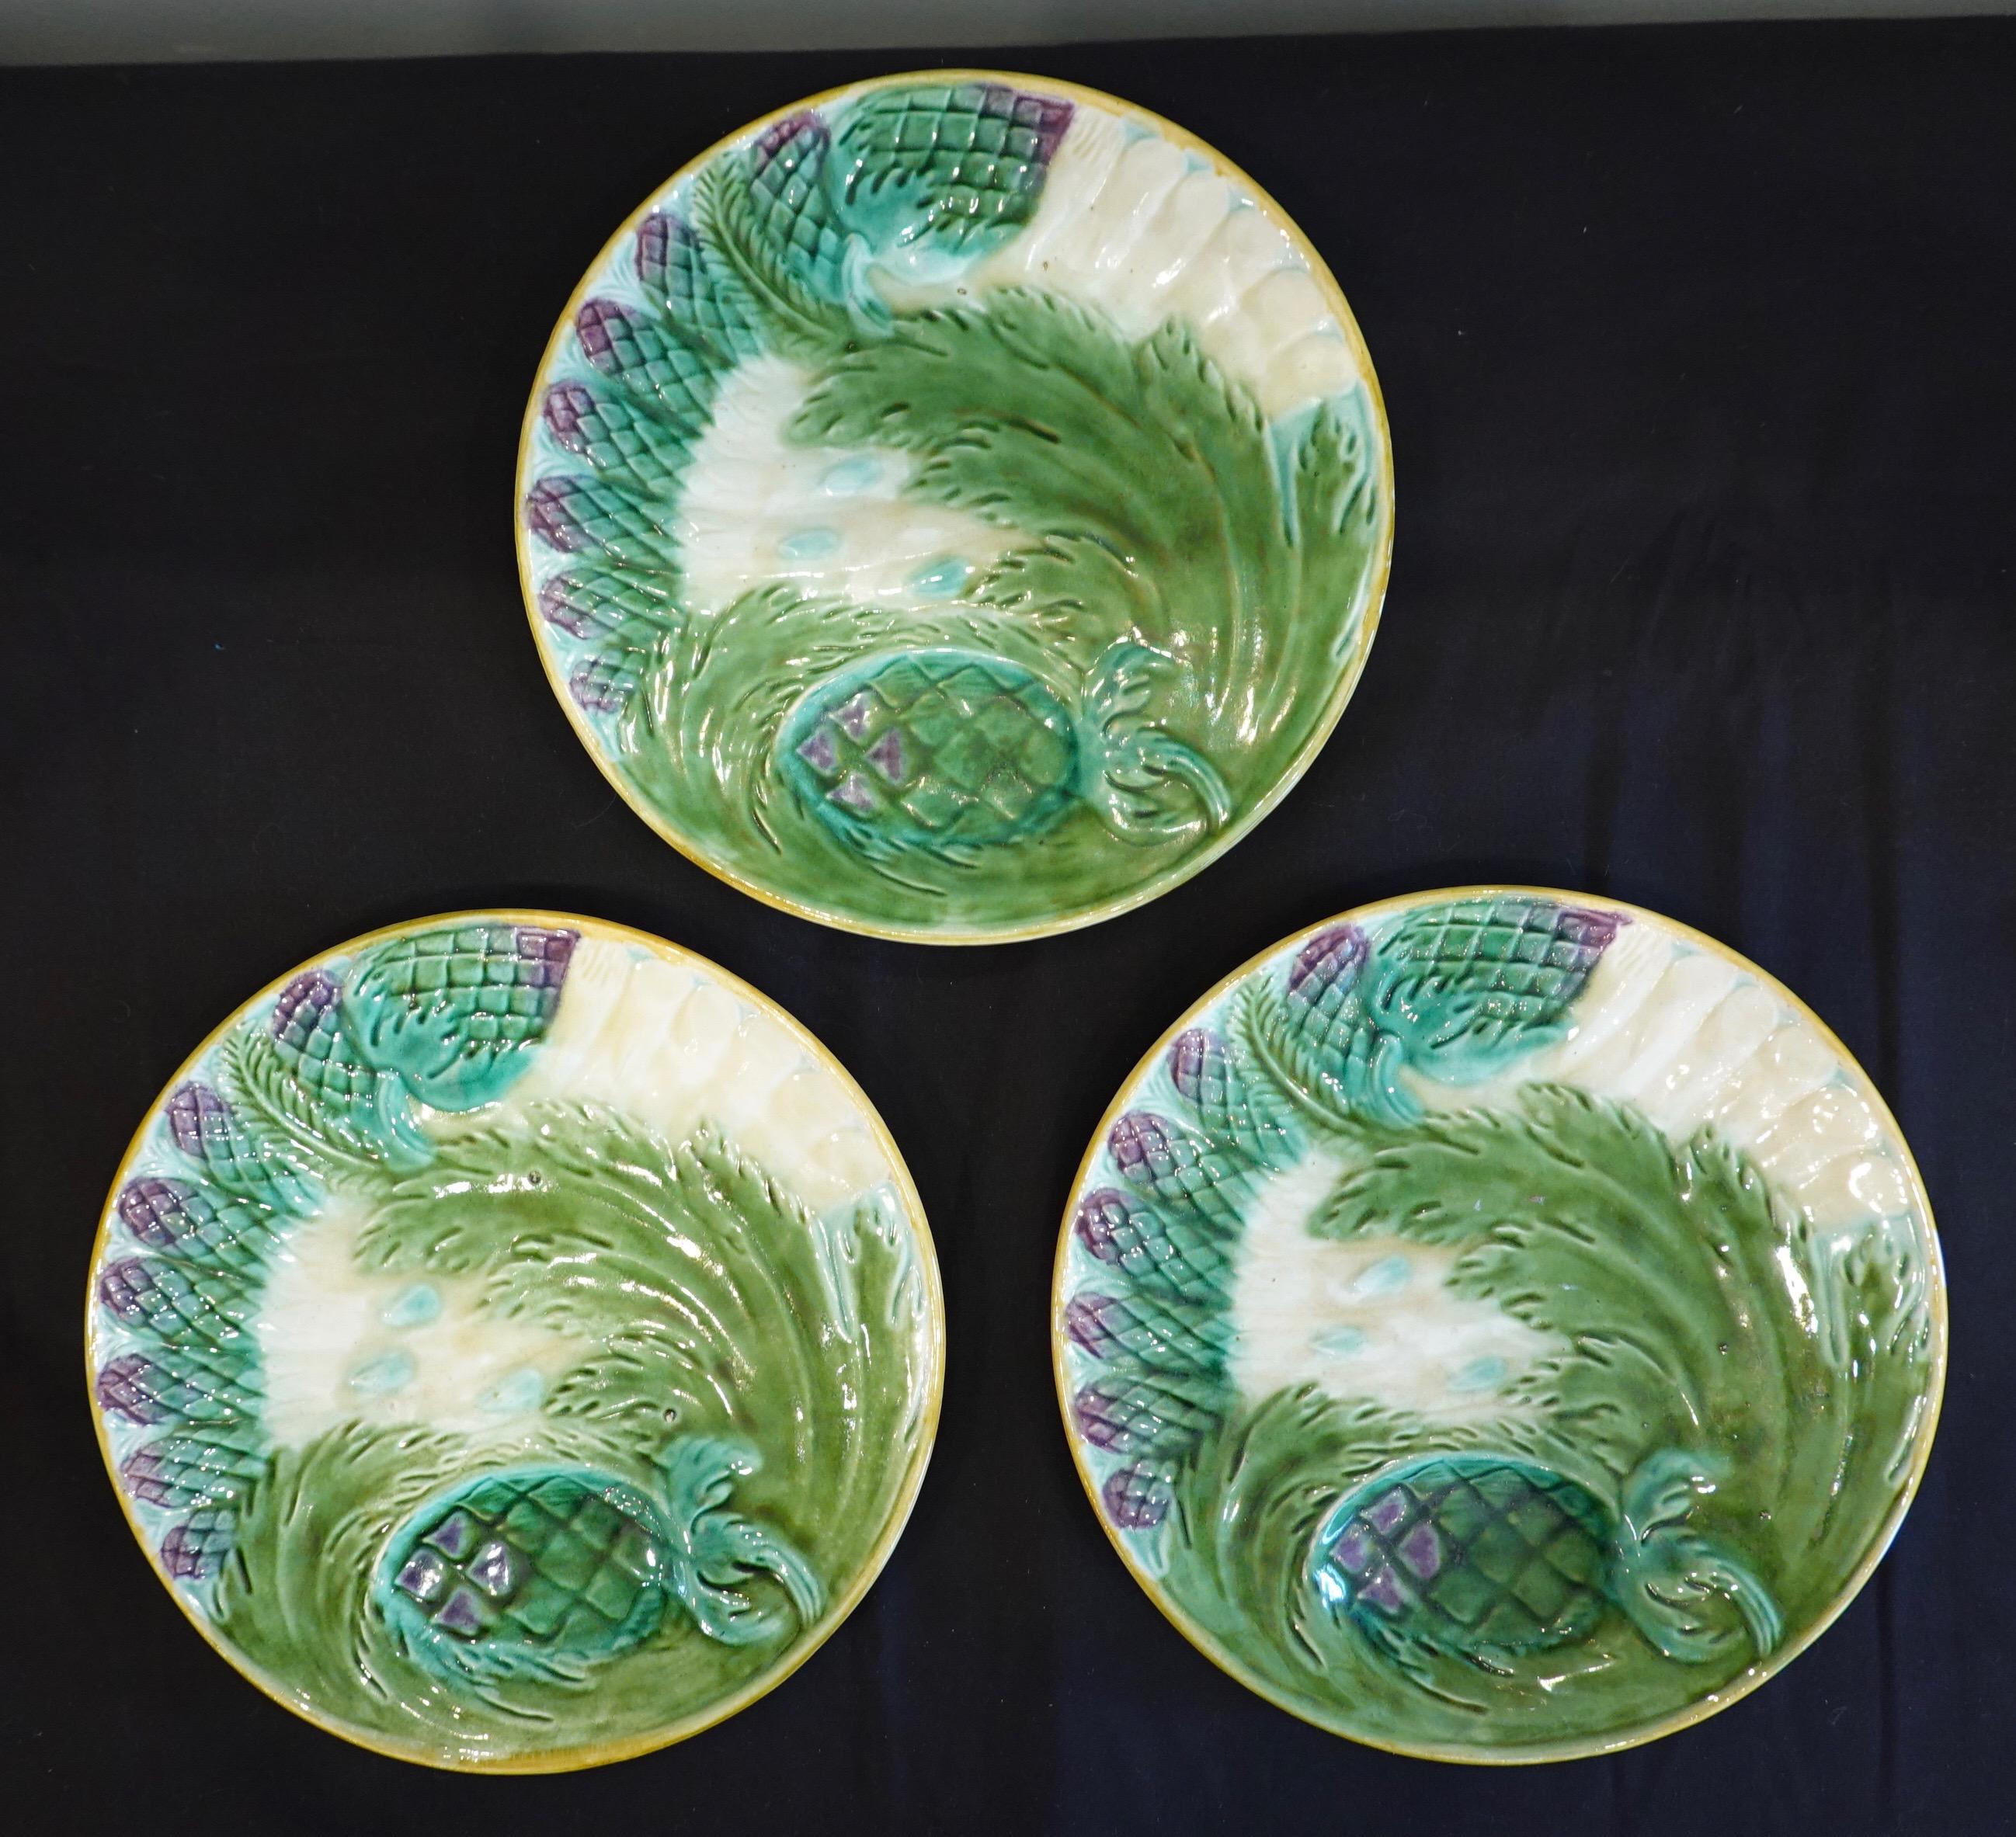 Set of three French Majolica asparagus plates by Saint Amand, (19th century). Each plate features a molded design of seven asparagus spears with an artichoke and acanthus leaf, with a depression for lemon or sauce. One plate is stamped Saint Amand,